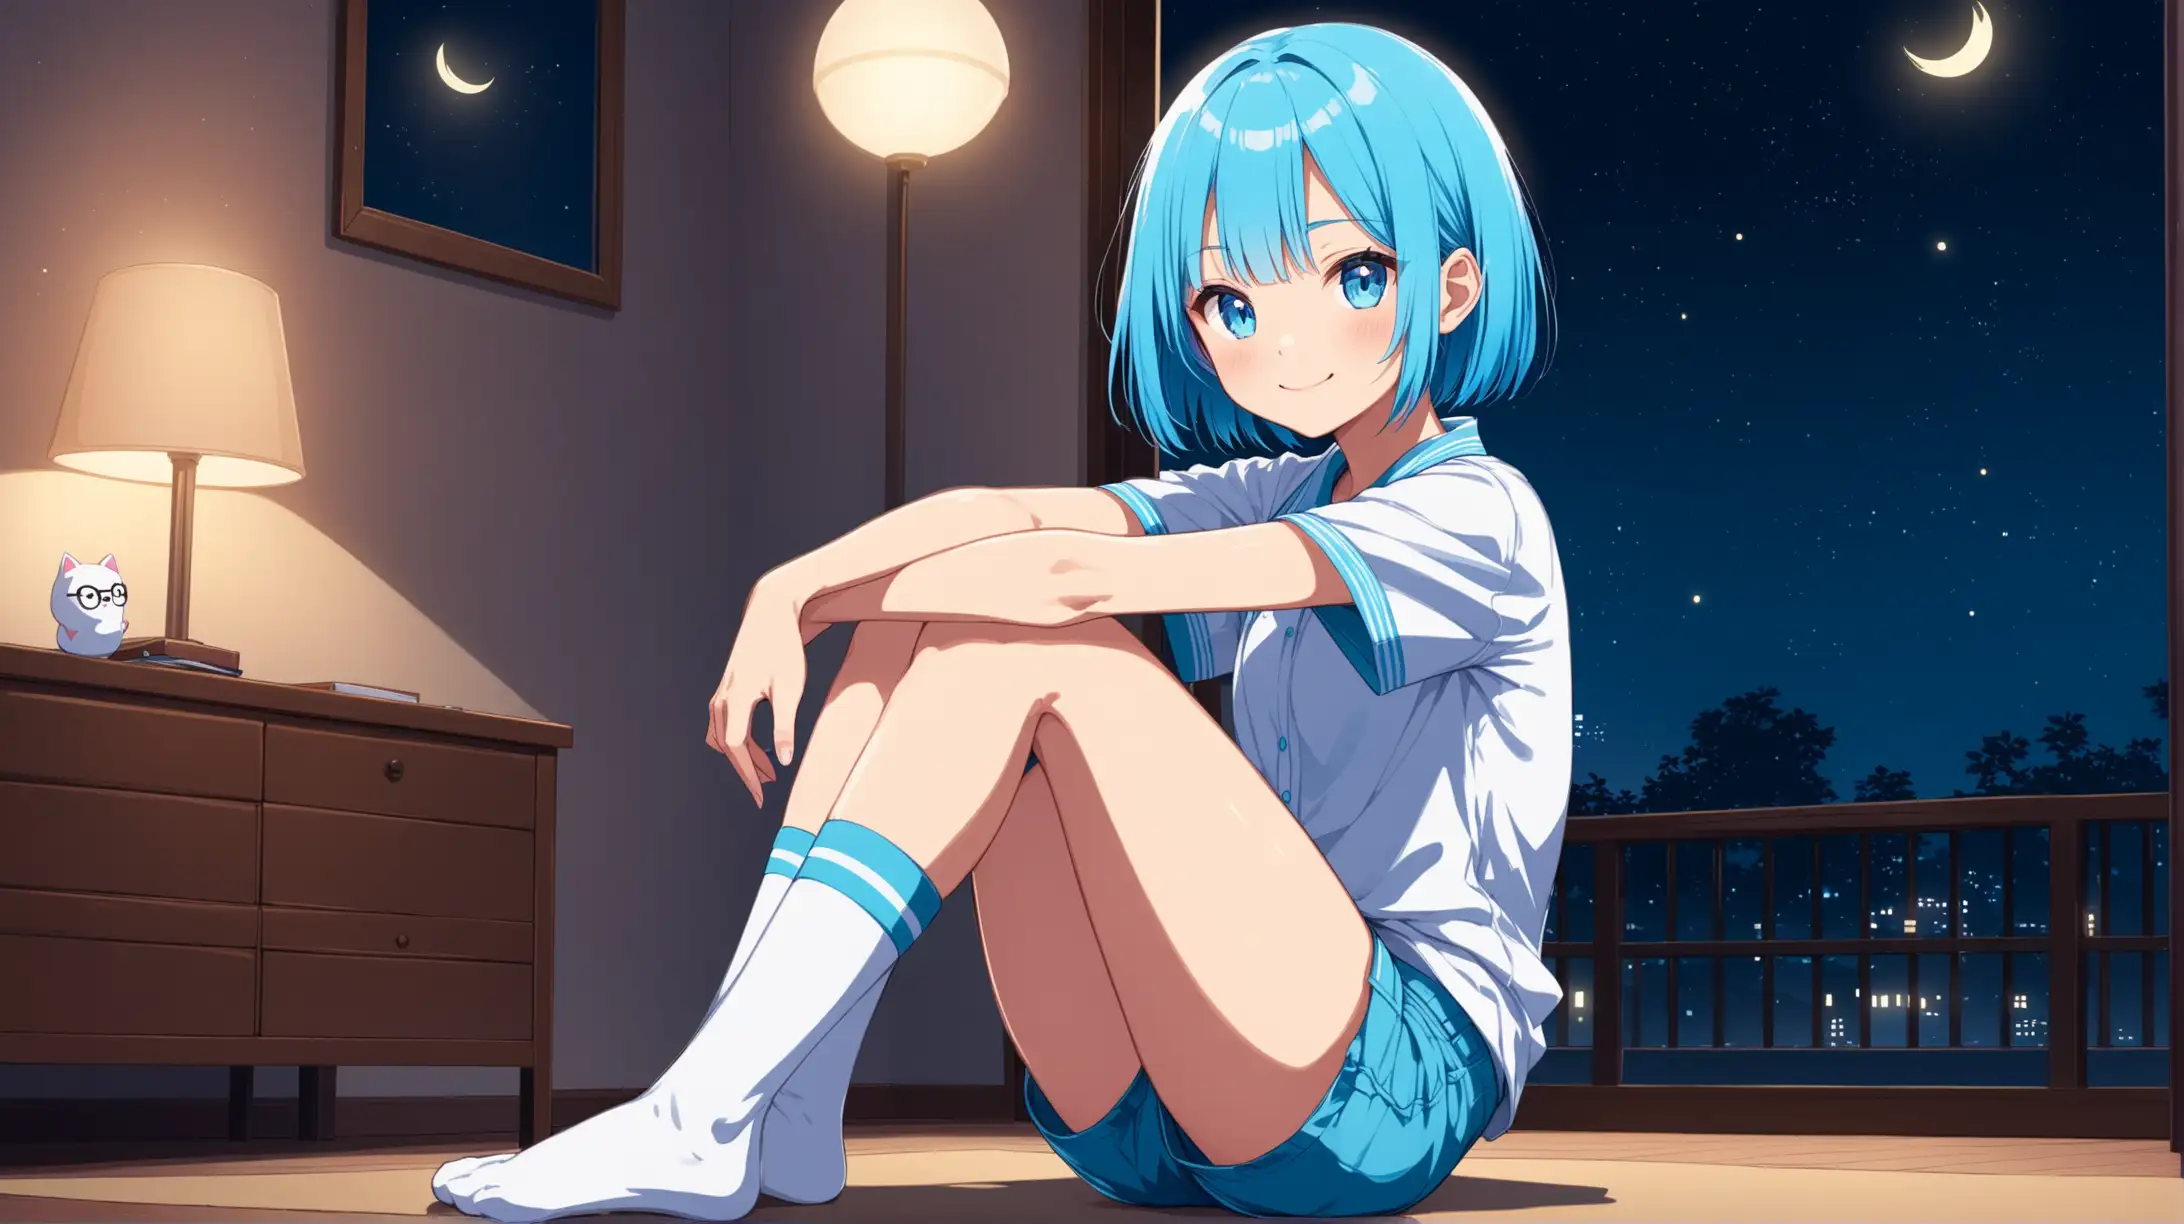 Draw the character Rem sitting in a dynamic pose alone indoors at night while she is wearing high socks with shorts and a shirt and smiling at the viewer